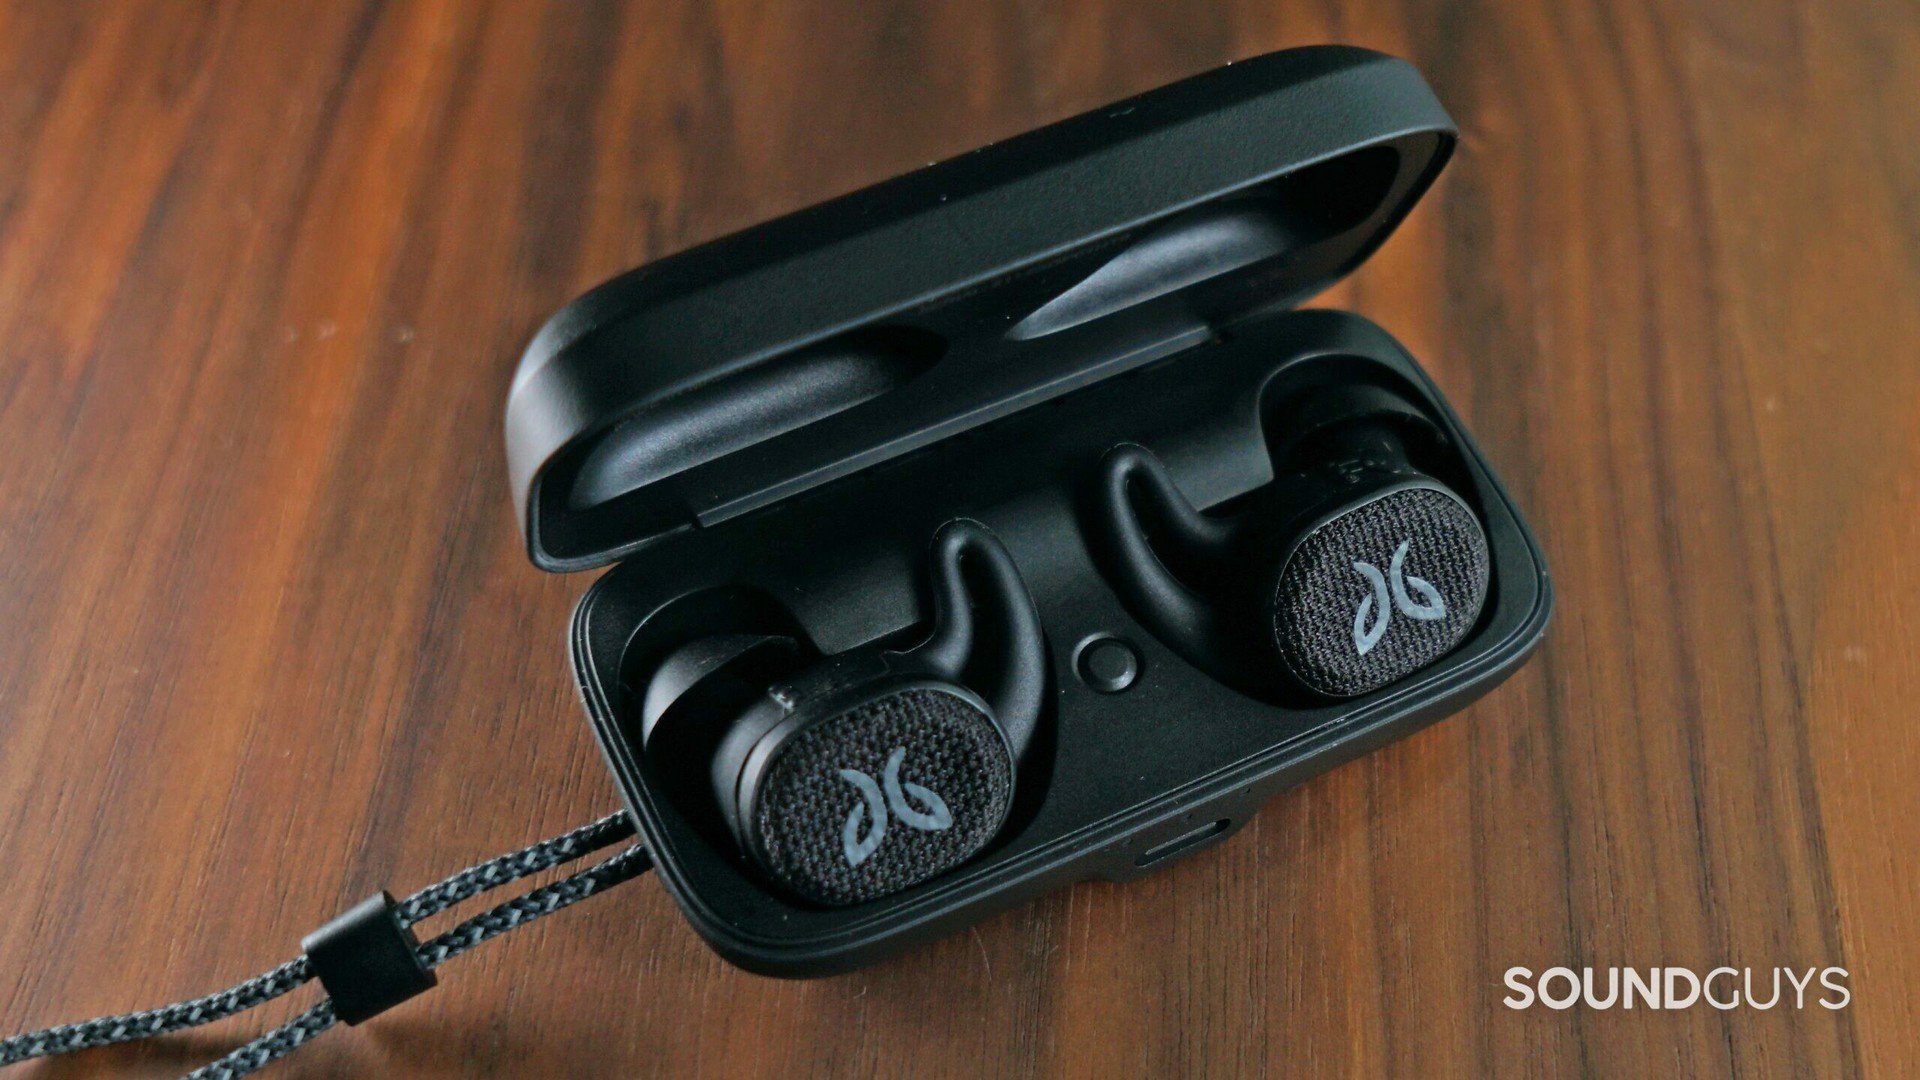 The Jaybird Vista 2 in black on top of a wood surface.